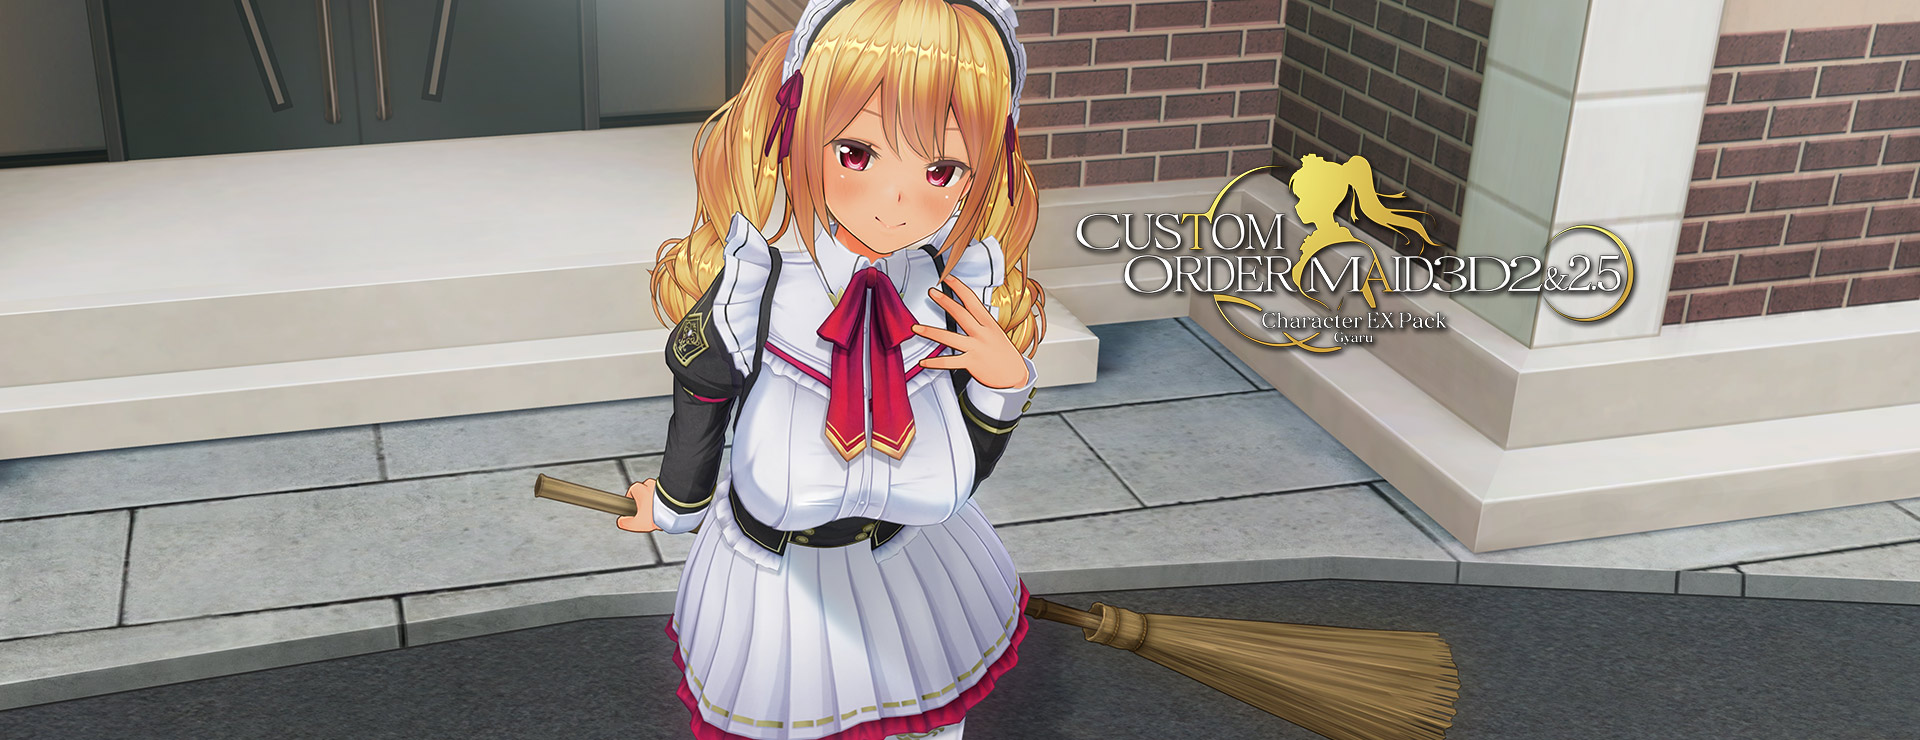 Custom Order Maid 3D 2: Character EX Pack Gyaru High Poly All In One Edition - Simulation Spiel